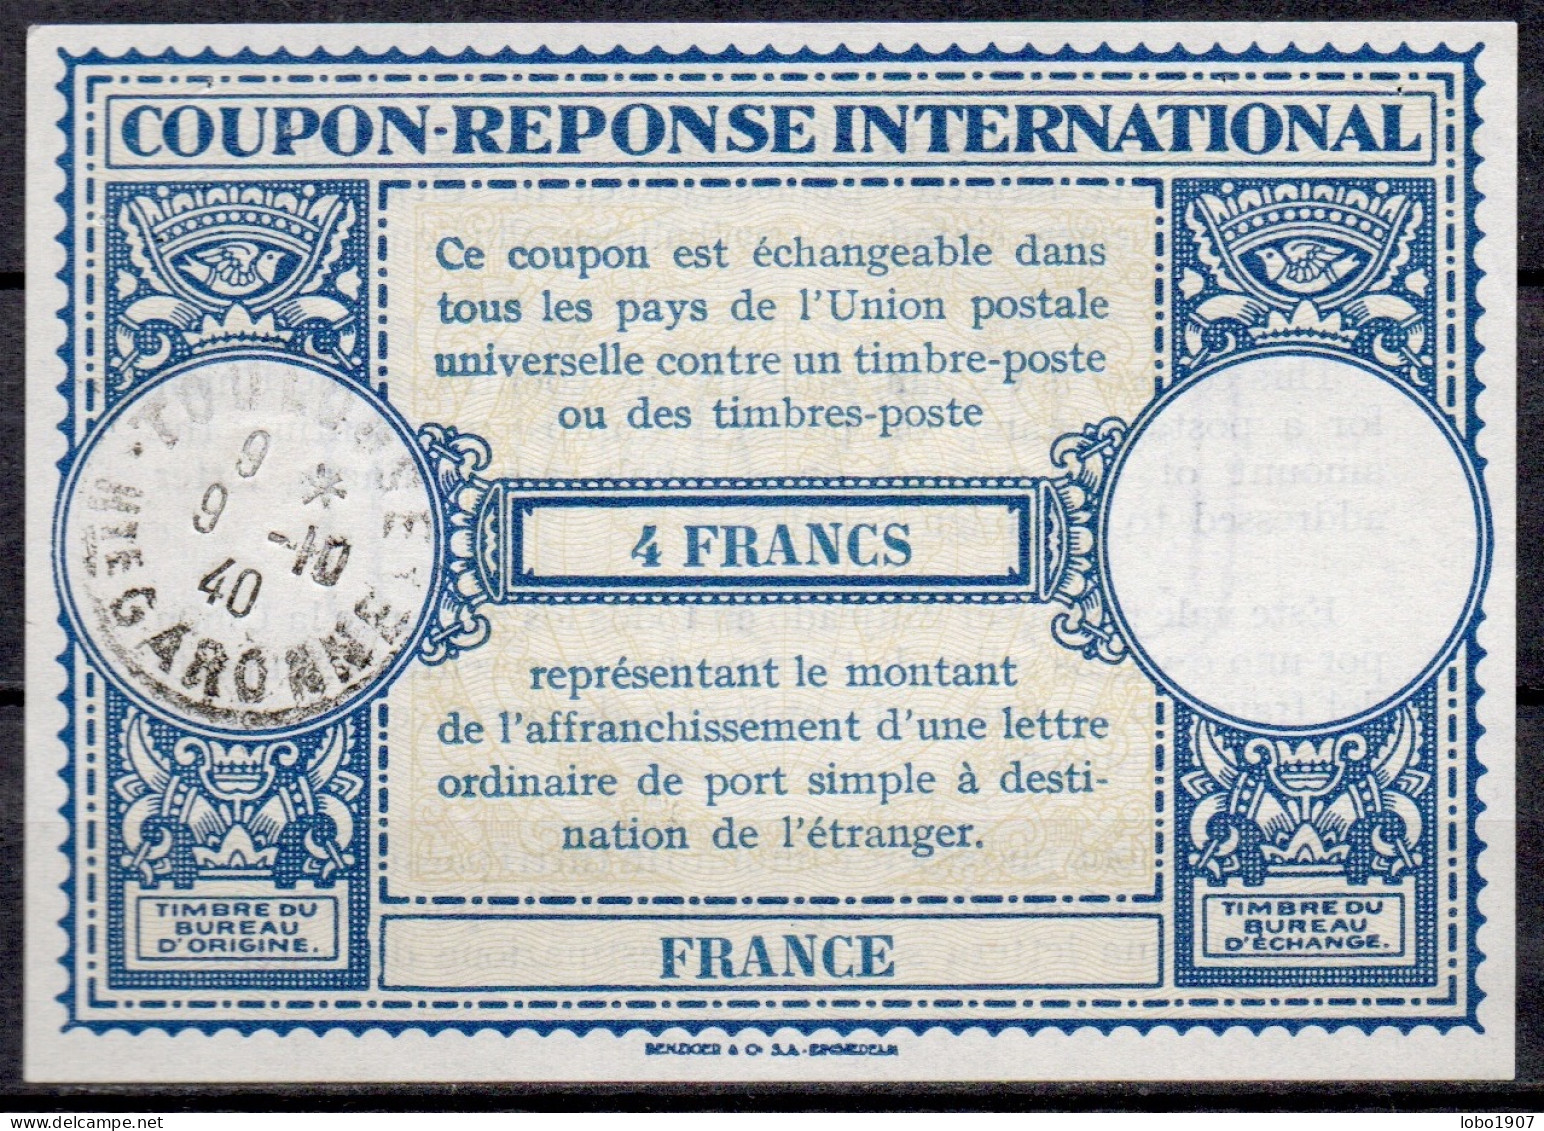 FRANCE  Rare Type Lo13ap  4 FRANCS  International Reply Coupon Reponse Antwortschein IRC IAS Cupon Respuesta O TOULOUSE - Antwoordbons